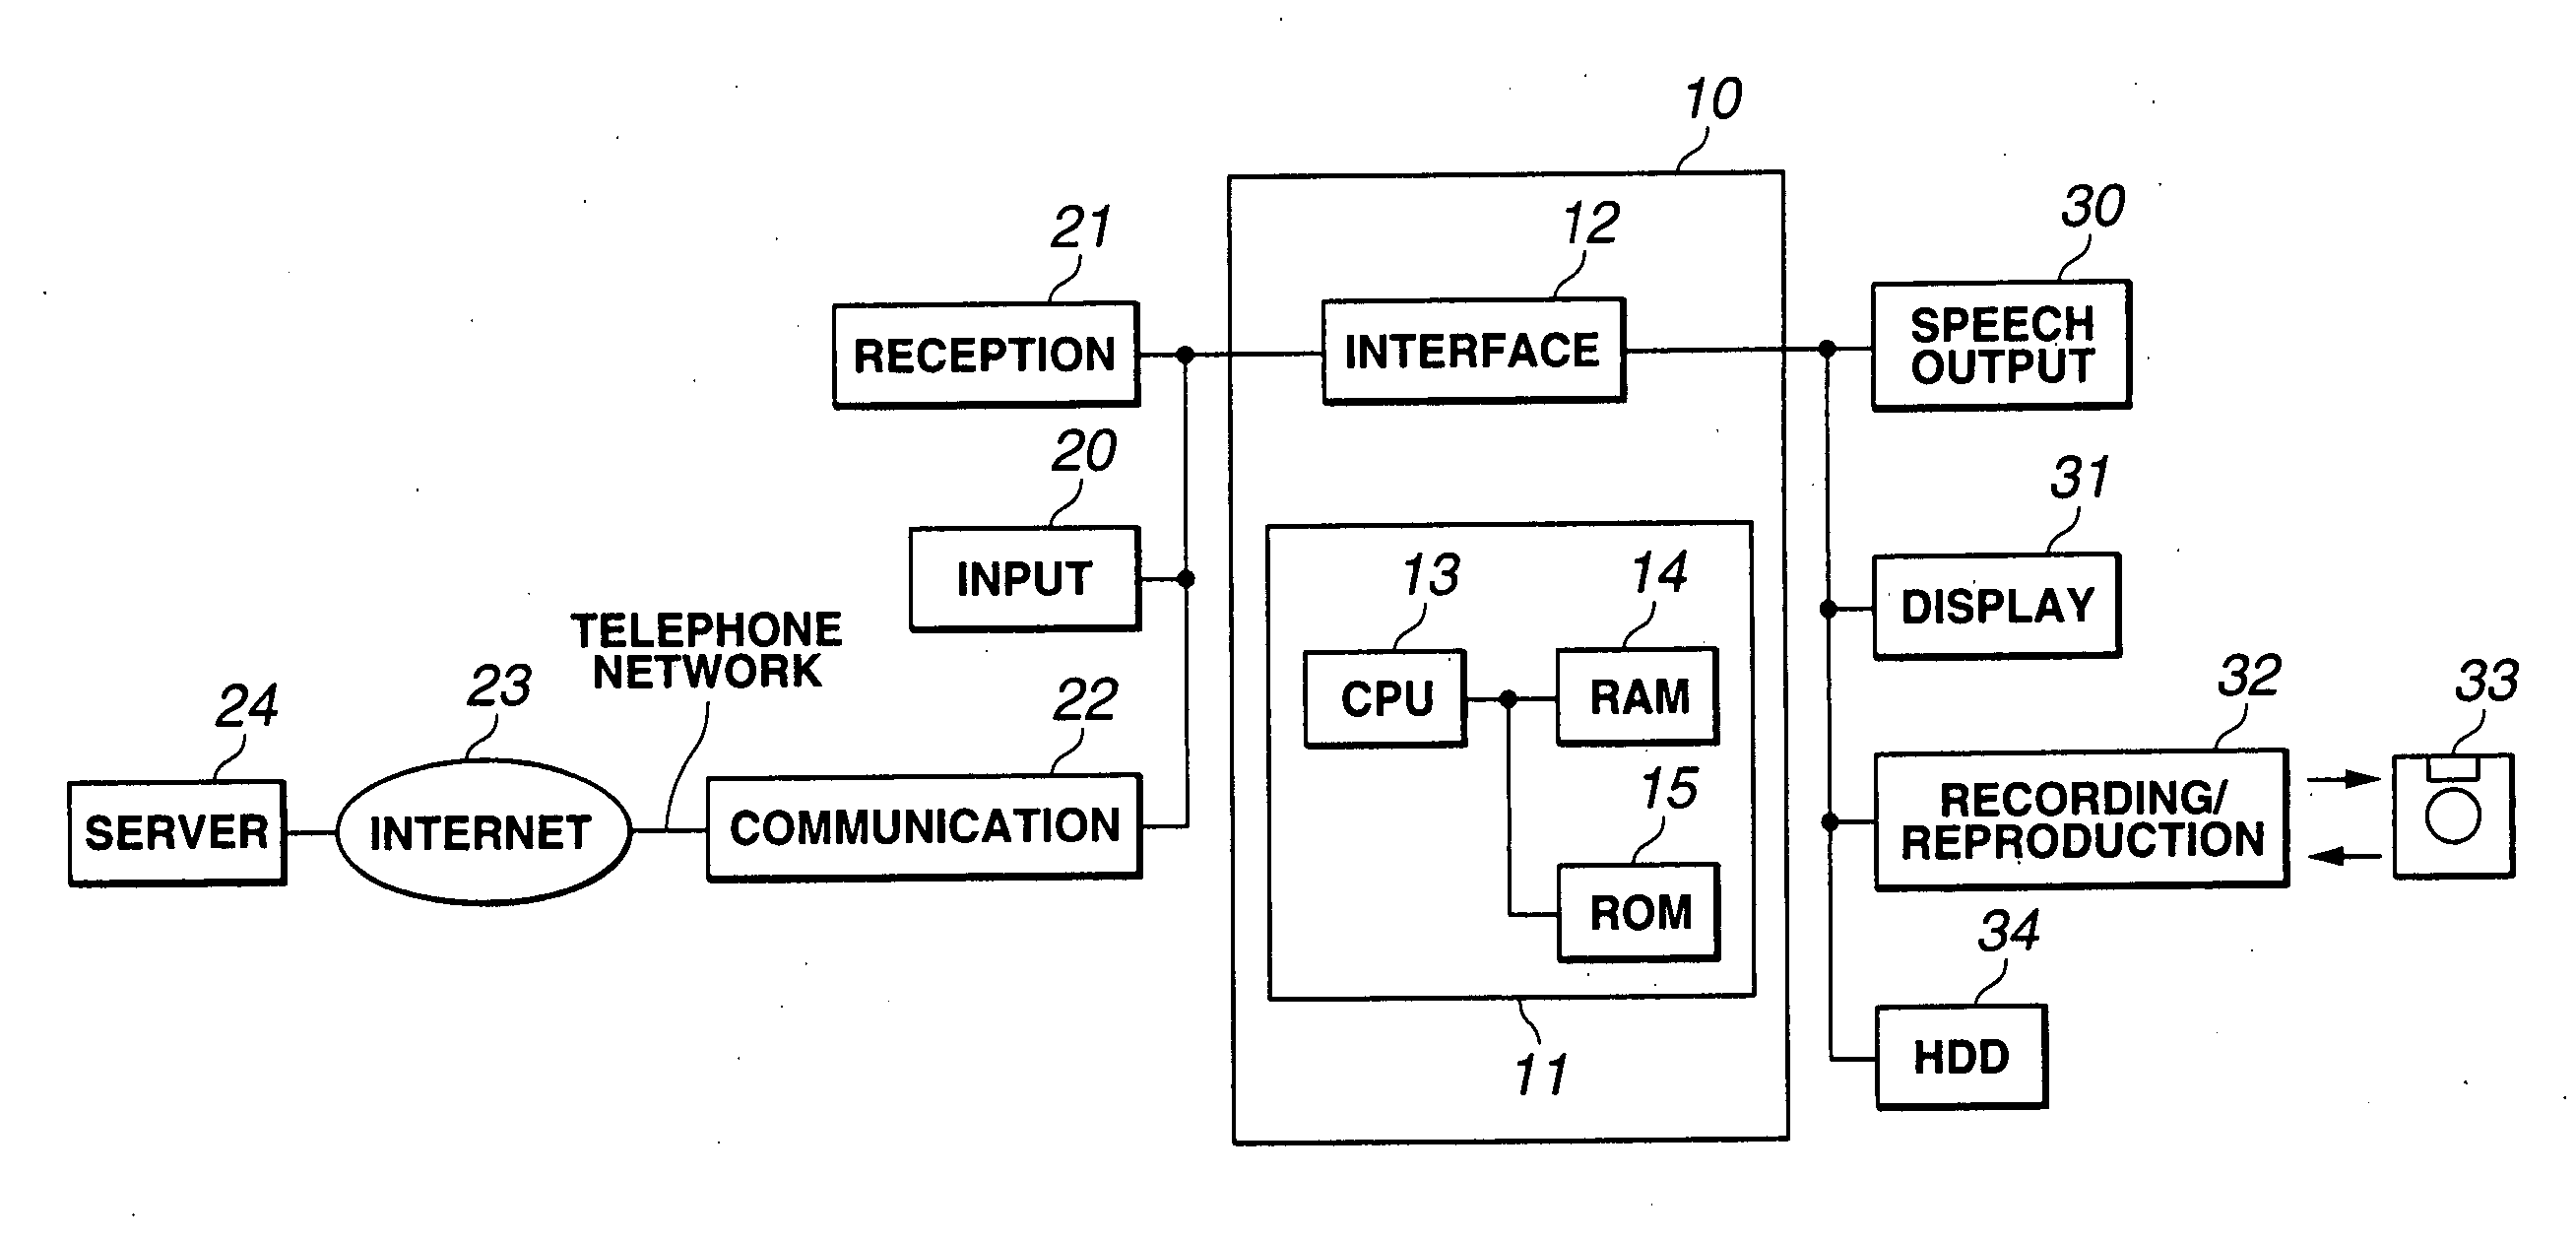 Electronic document processing apparatus